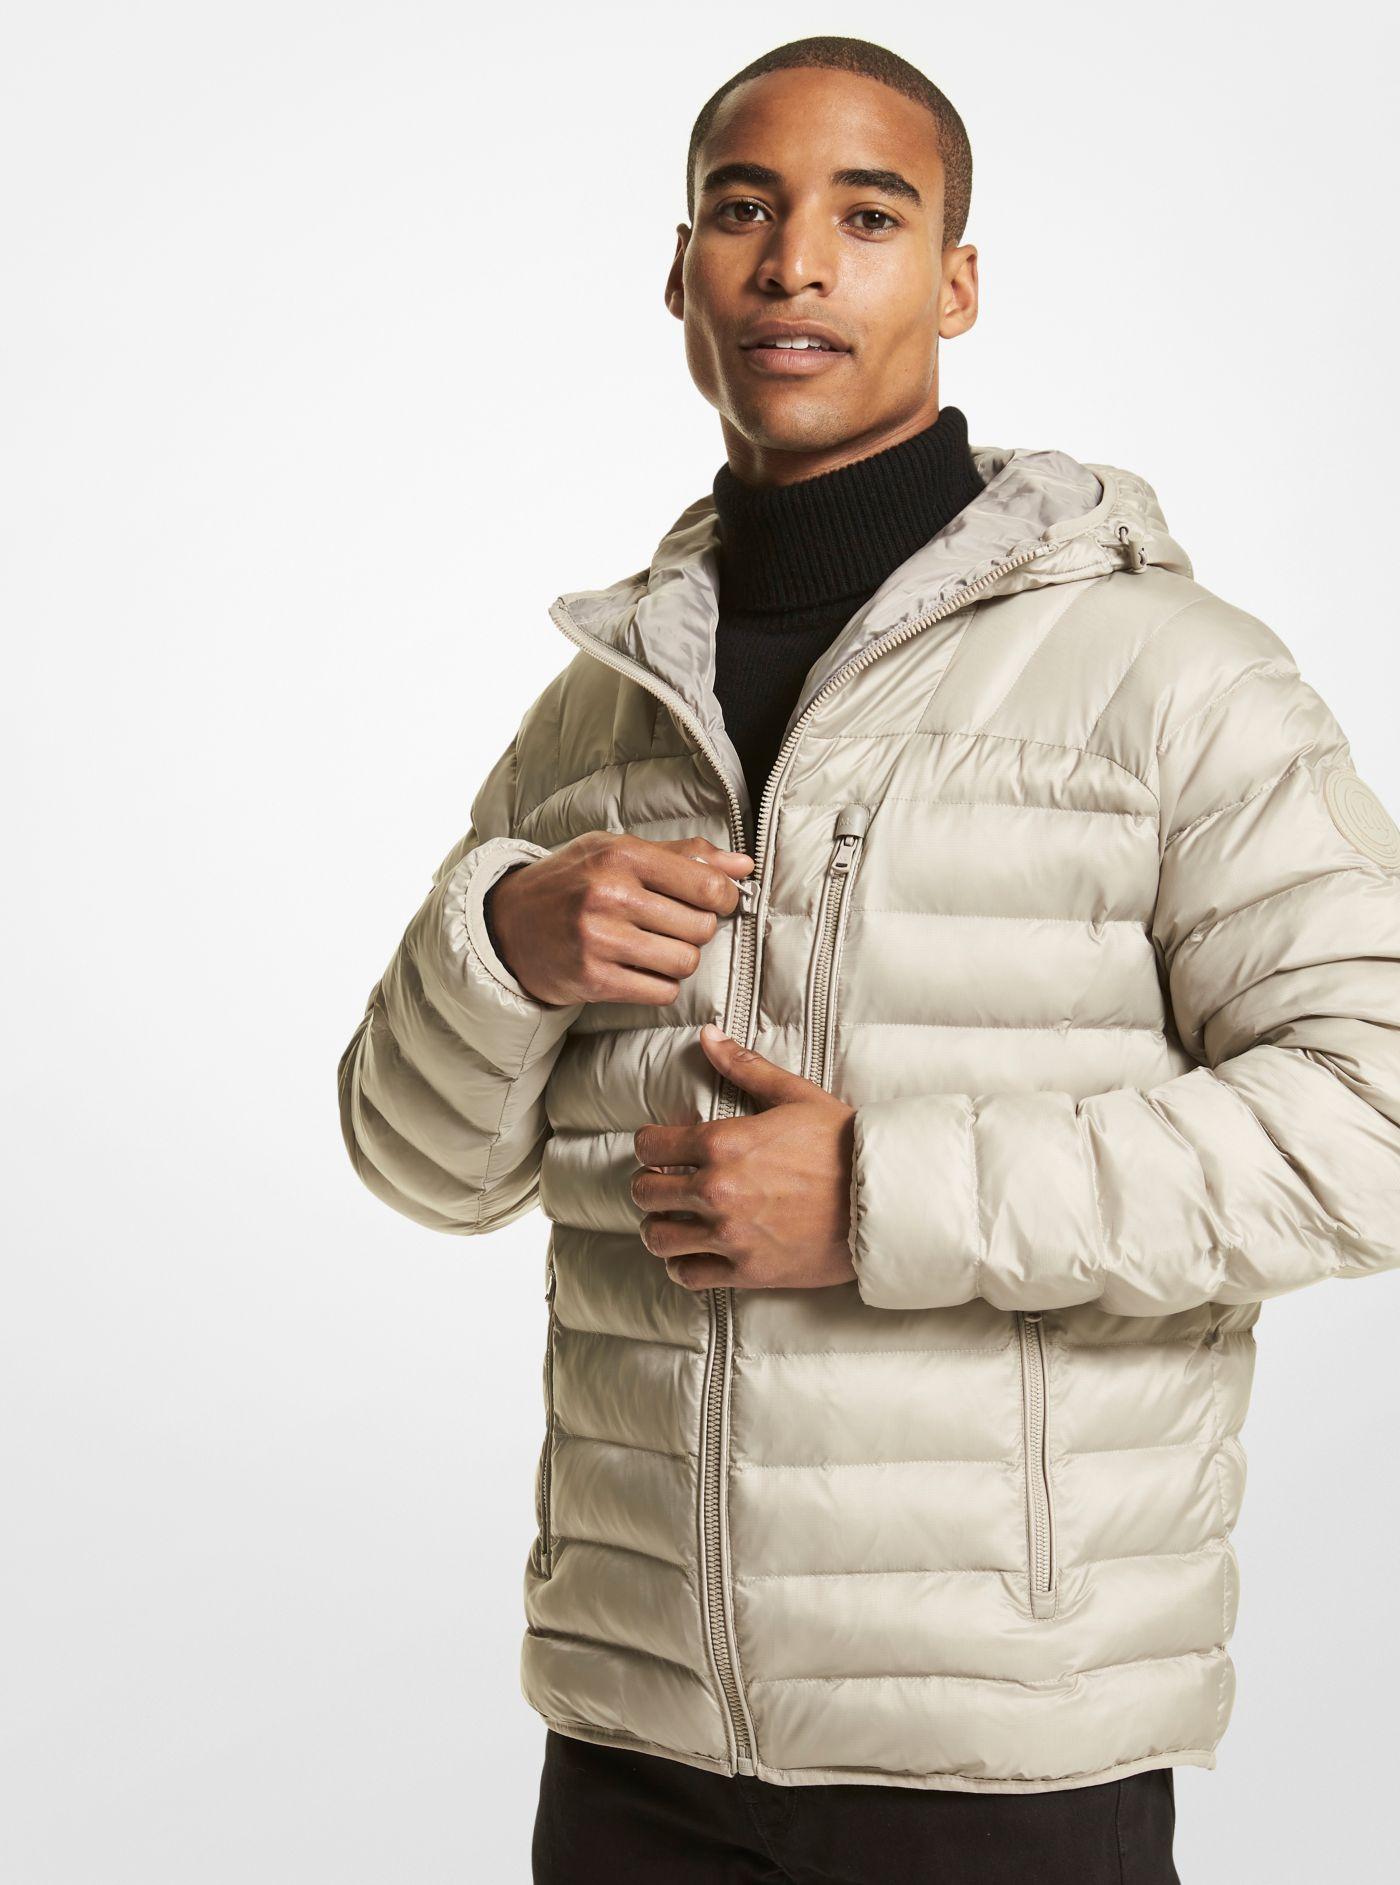 How To Wear Puffer Jacket Mens | lupon.gov.ph